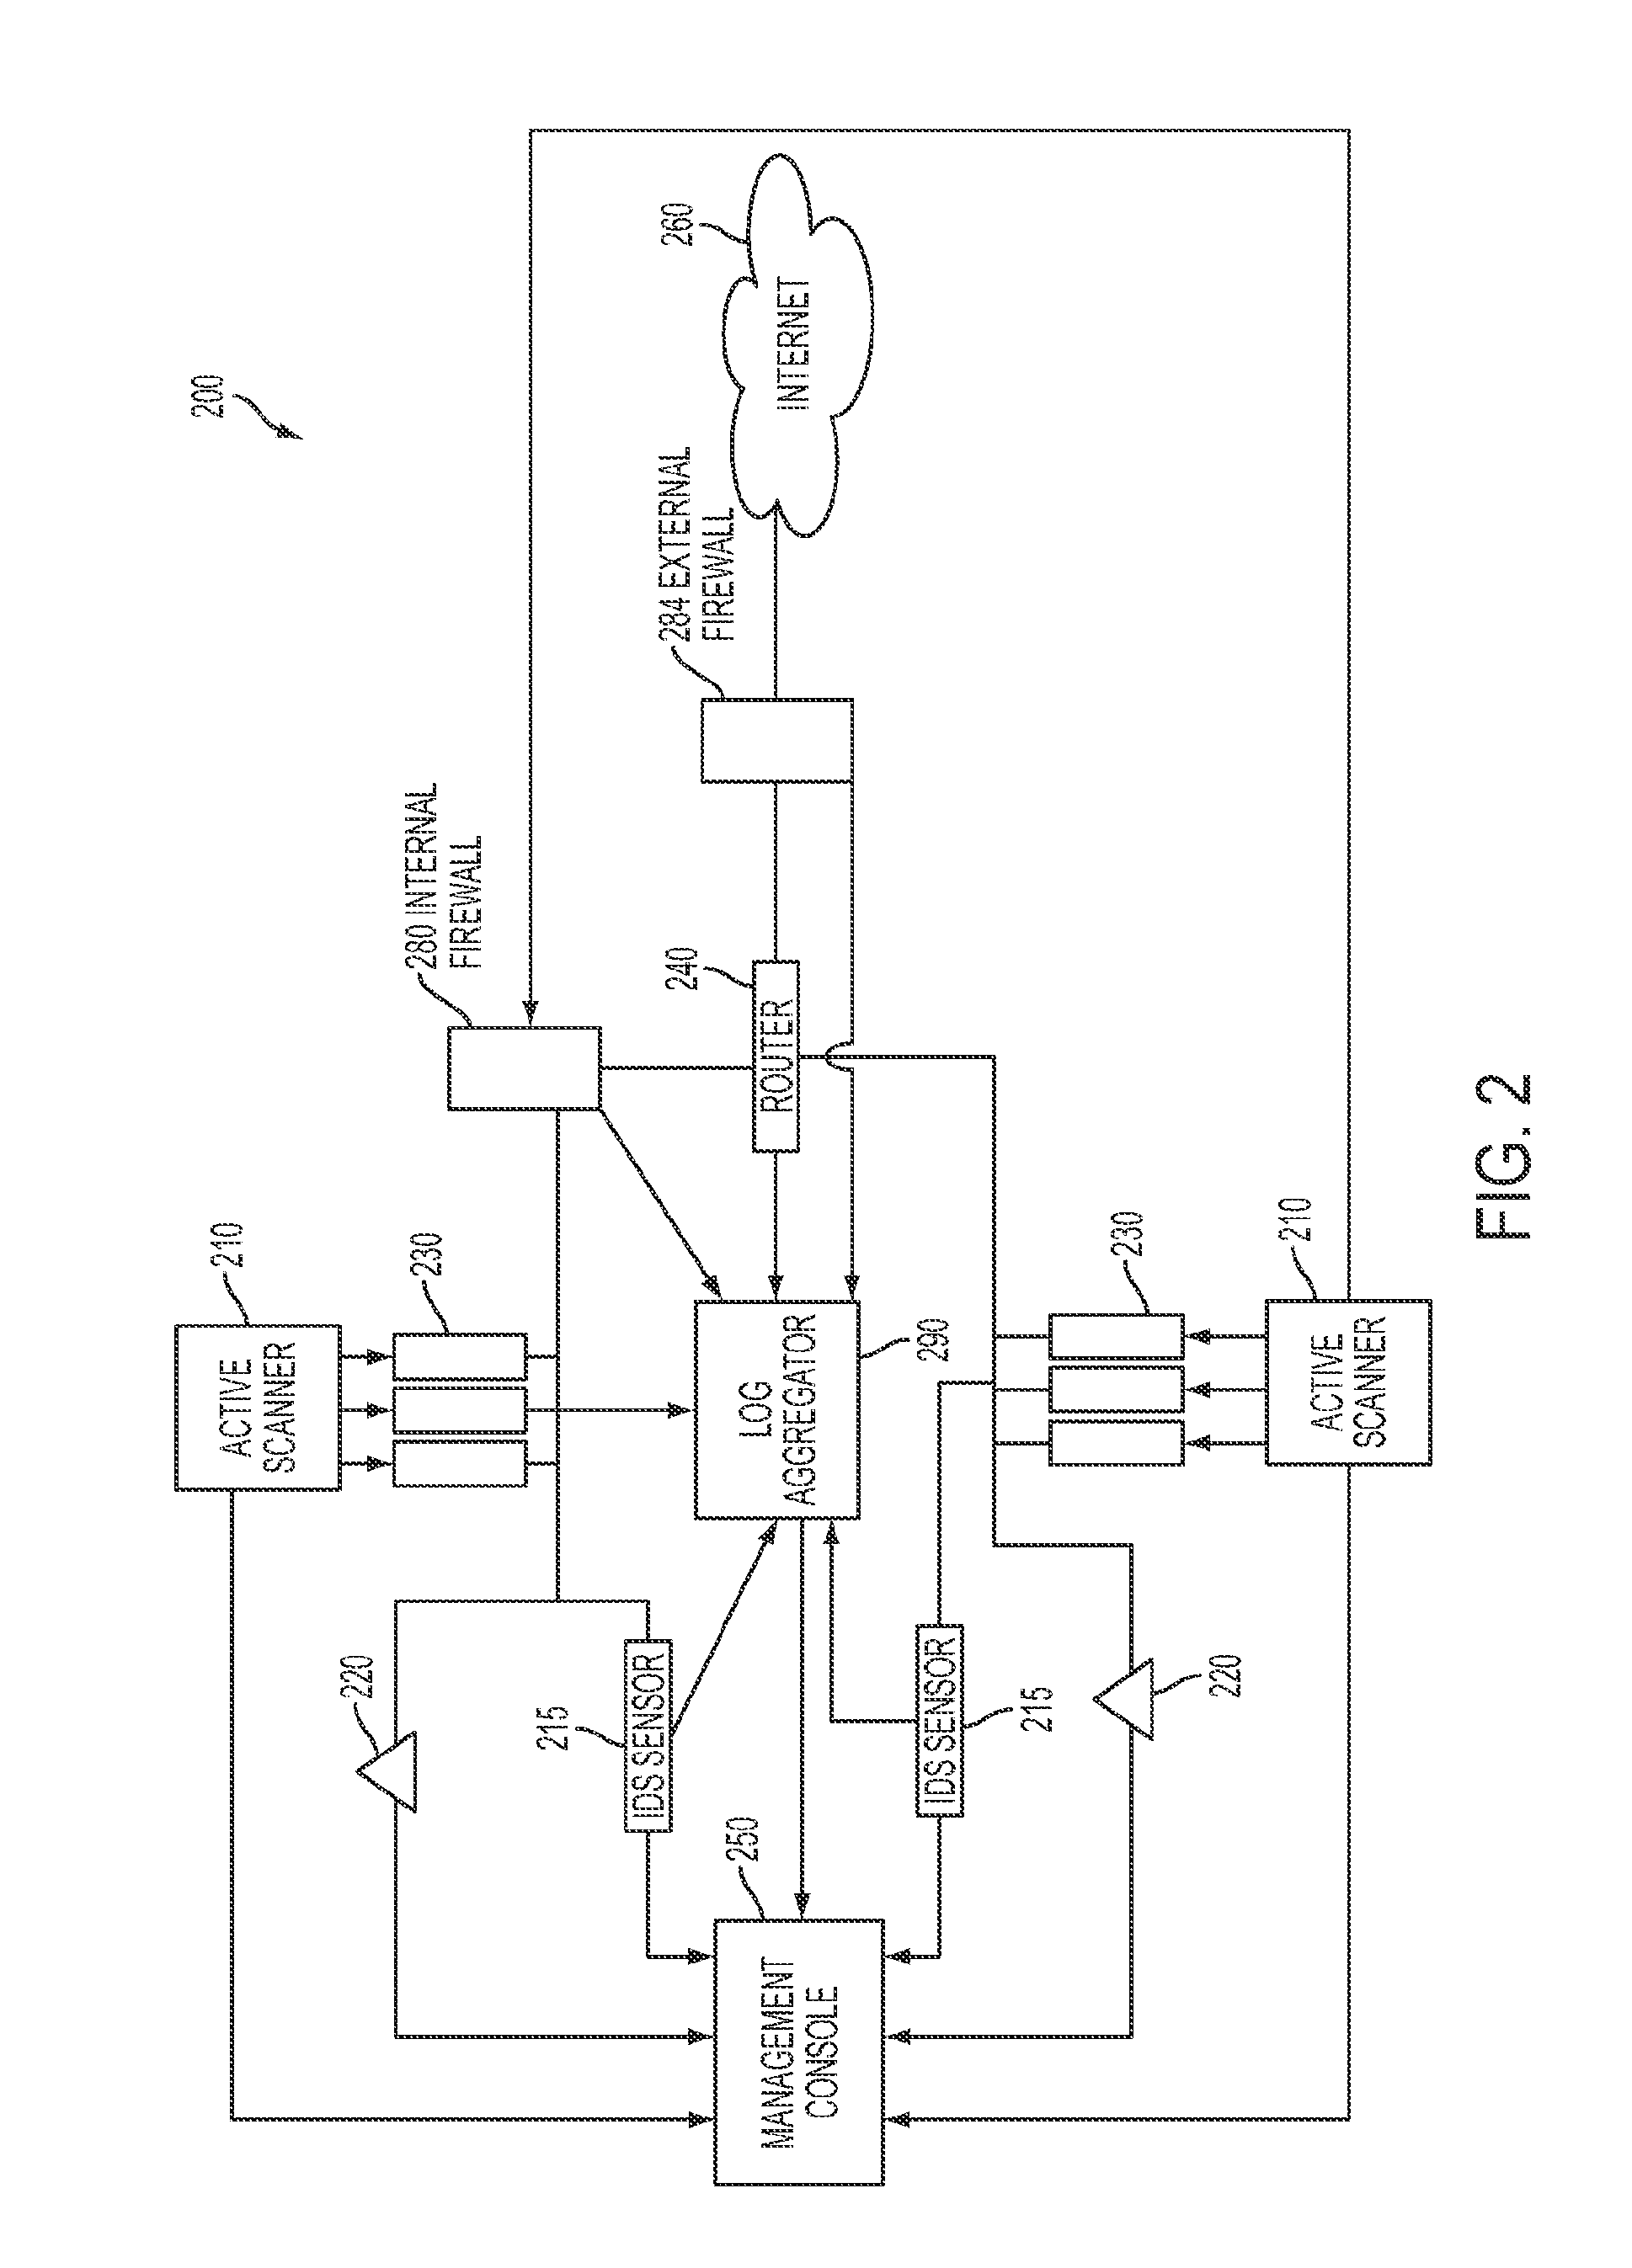 System and method for identifying exploitable weak points in a network